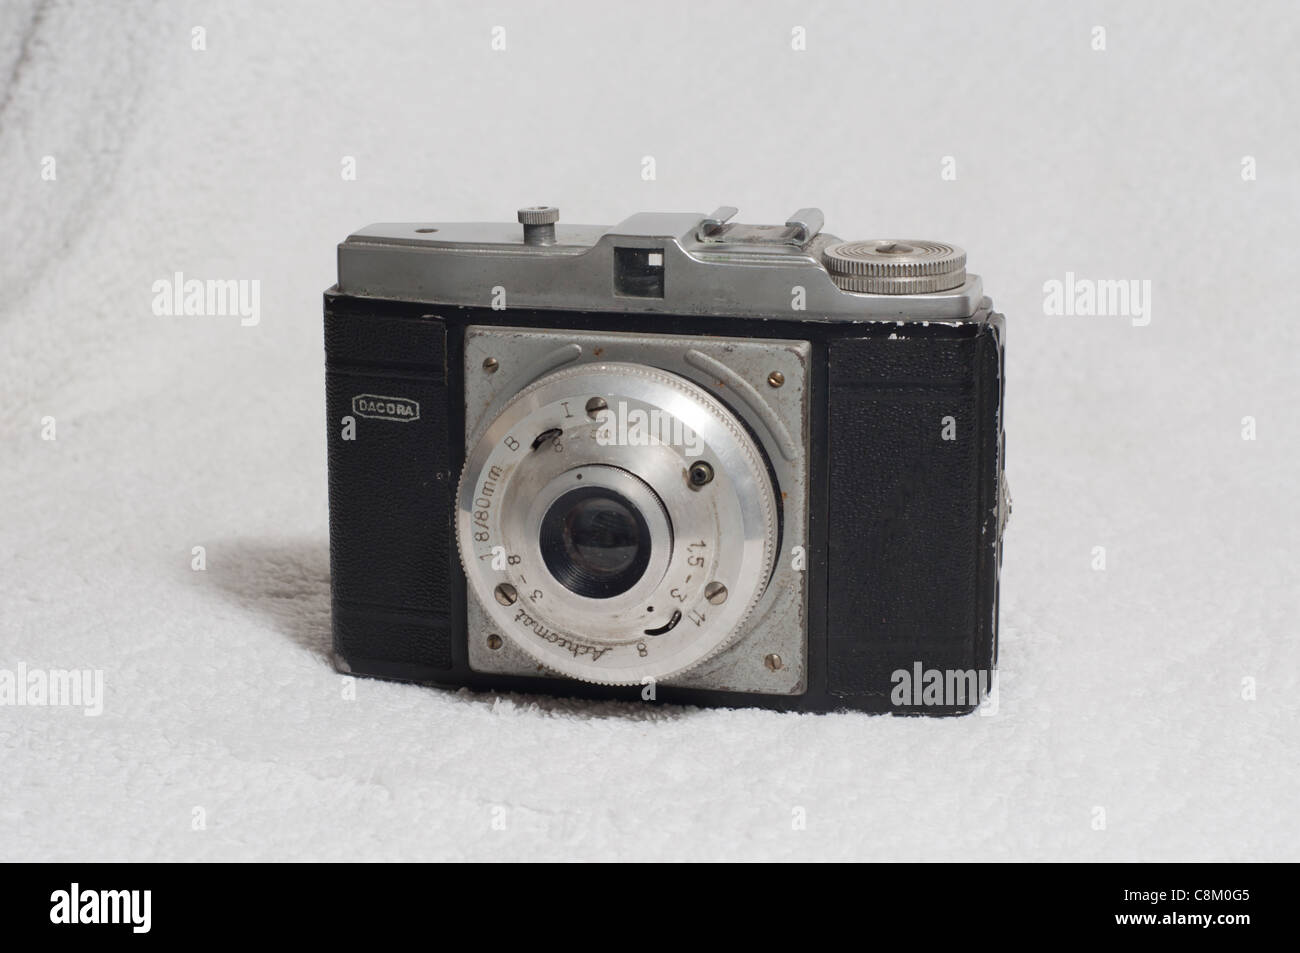 The Dacora Digna is a medium format fixed-lens viewfinder camera introduced by Dacora-Kamerawerk in 1954. Taking 120 roll film. Stock Photo